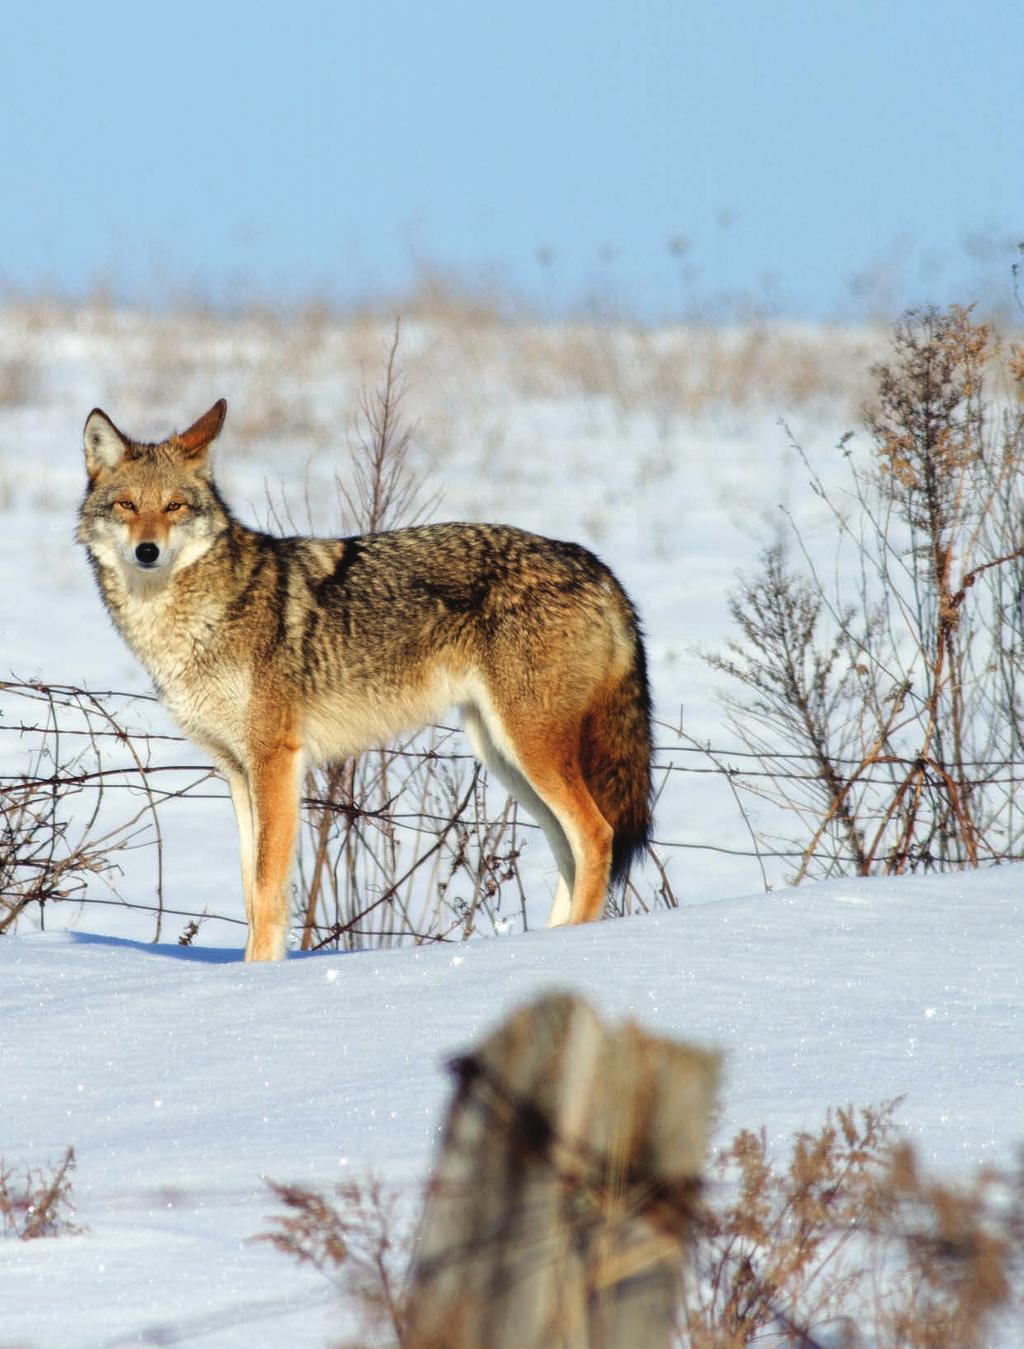 The health of coyotes indicates